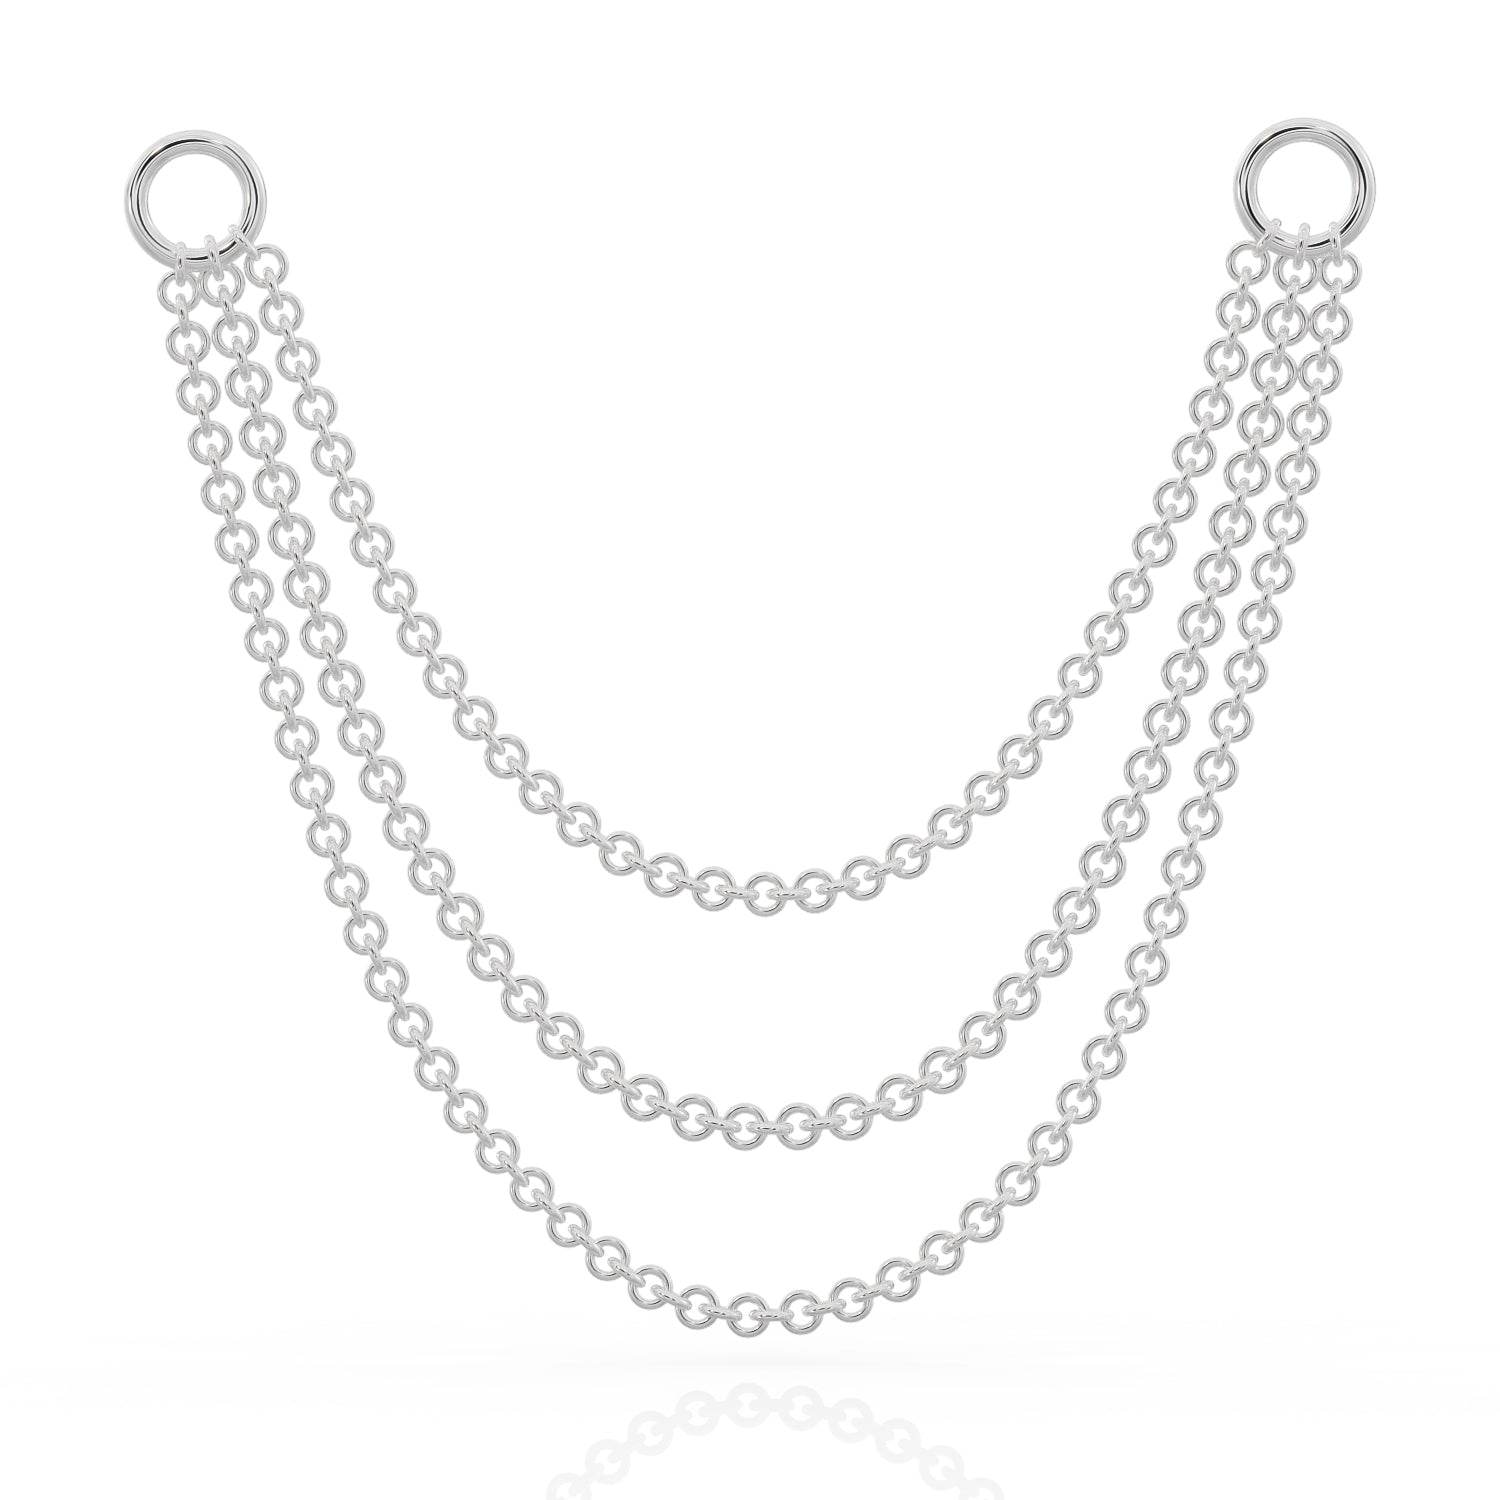 Three Link Chains Piercing Jewelry Add-on Accessory-White Gold   36mm